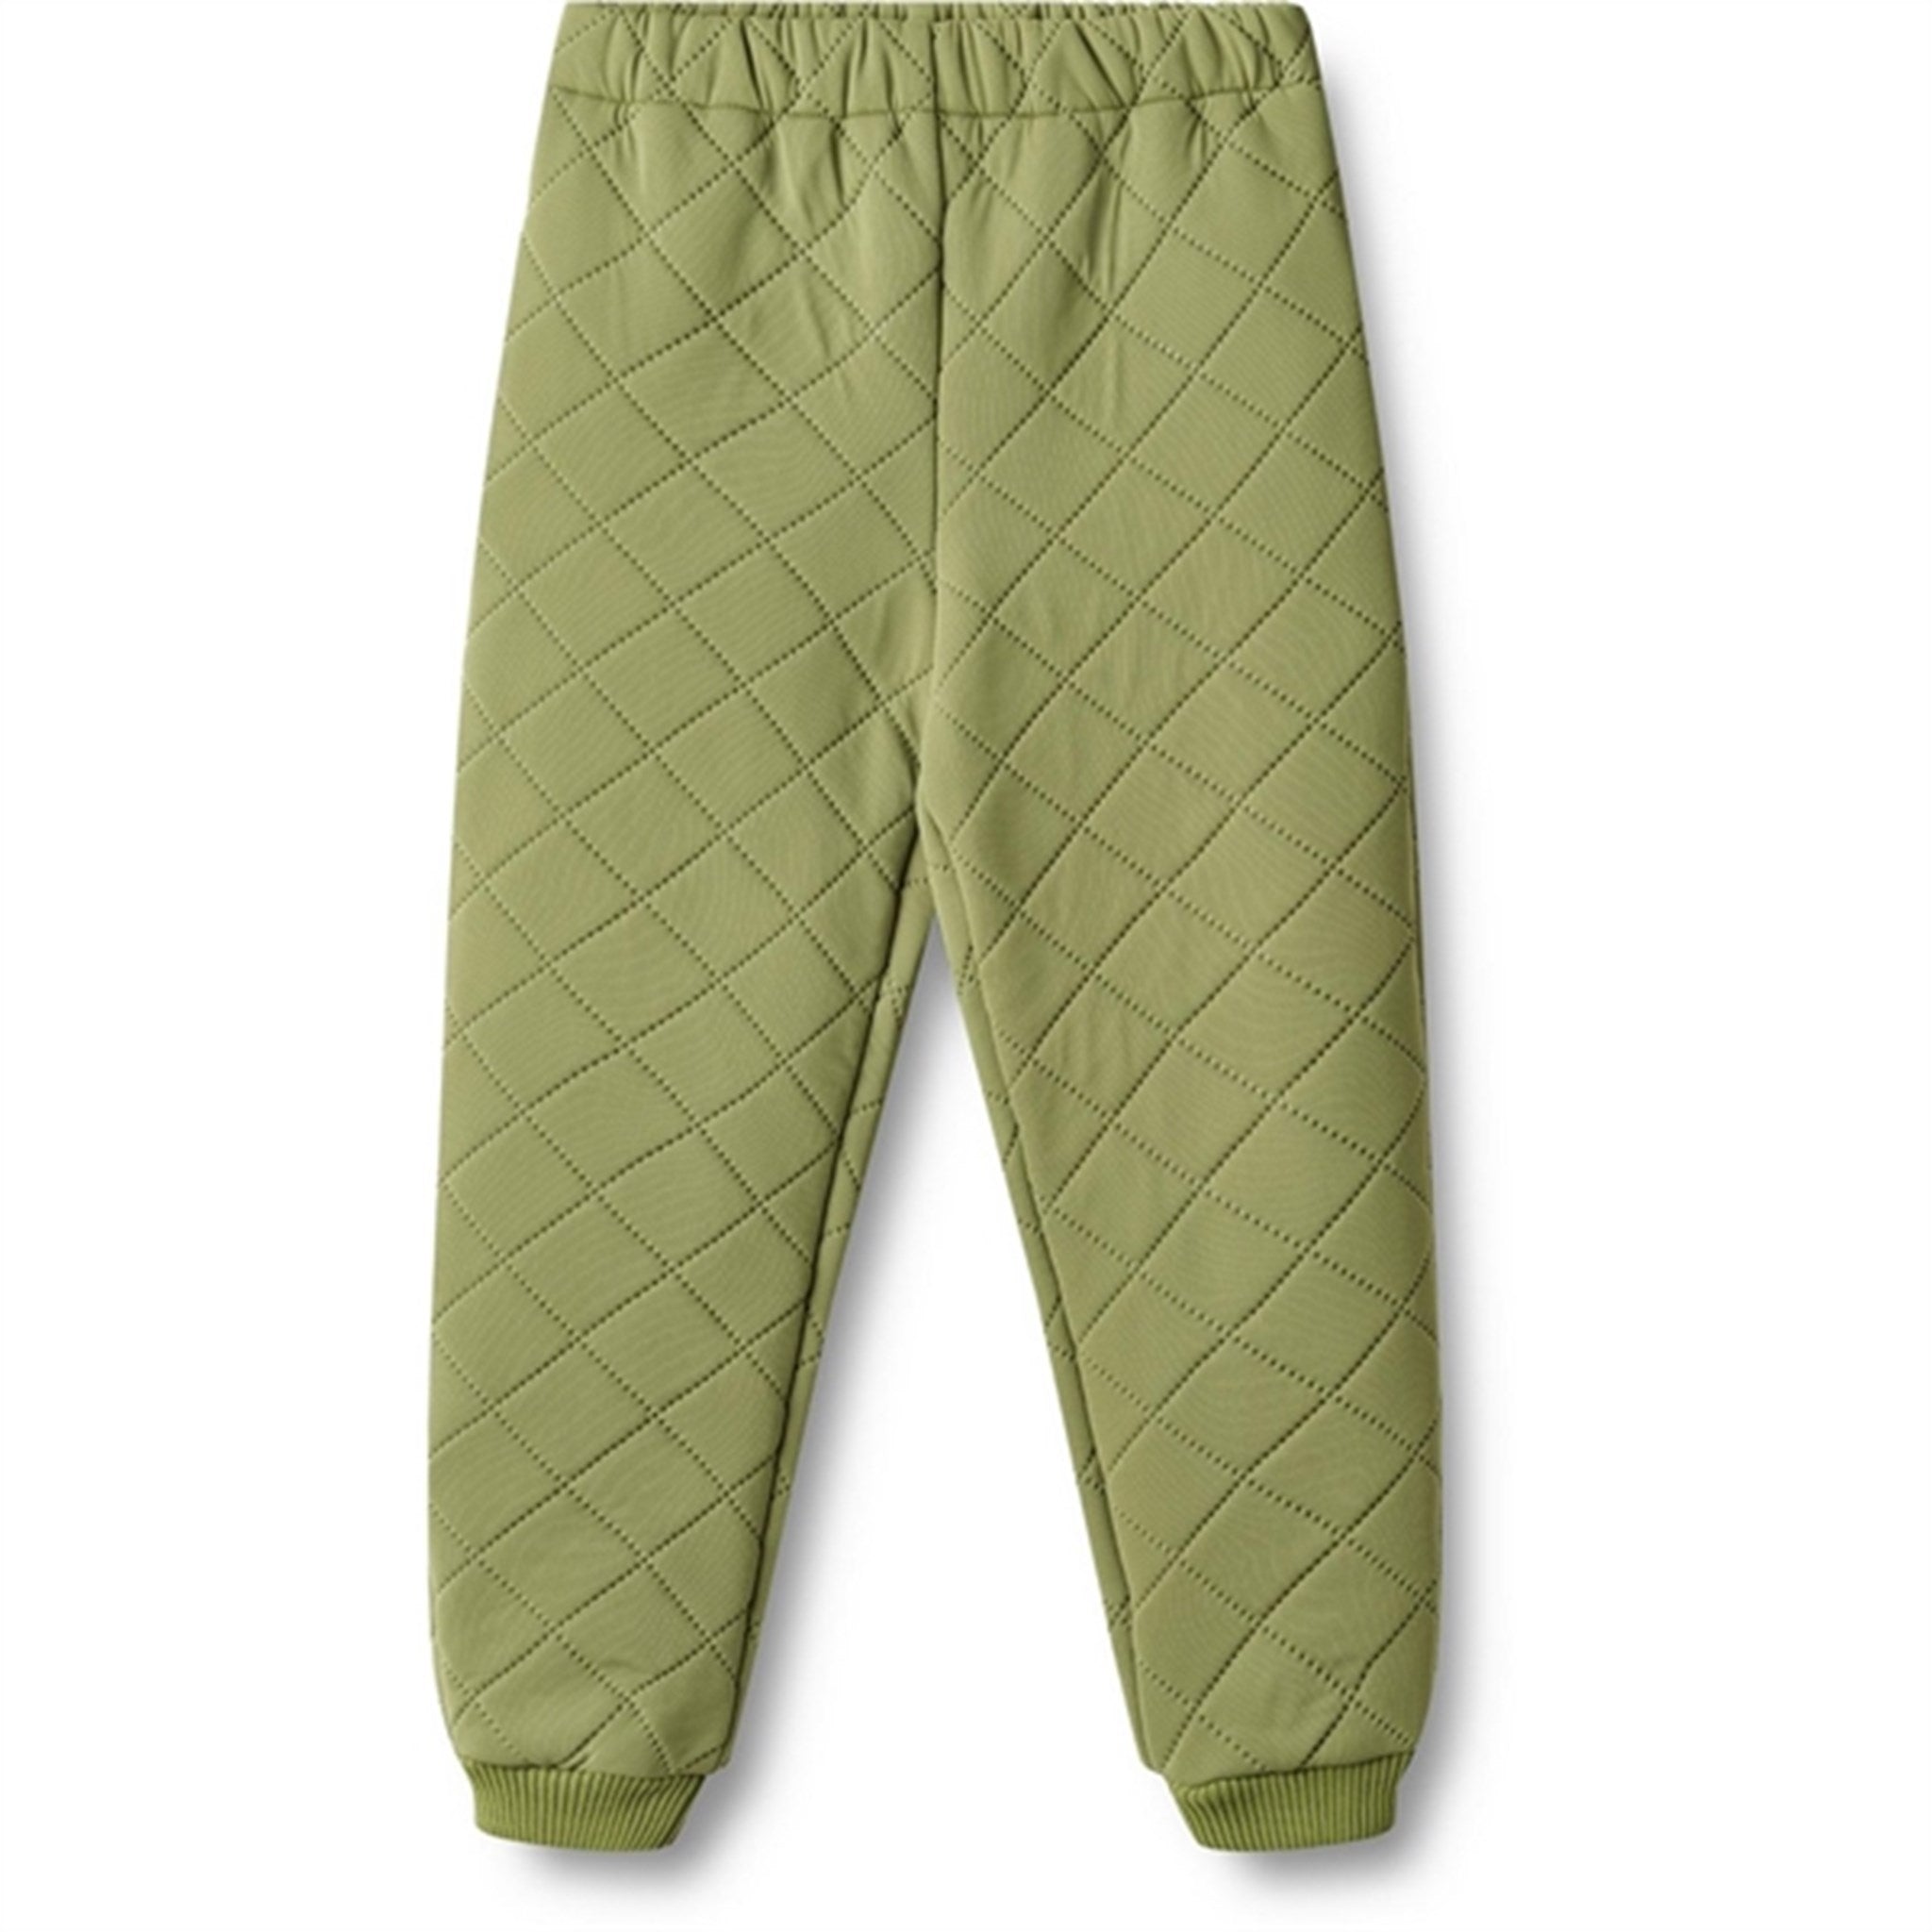 Wheat Thermo Chive Pants Alex 2